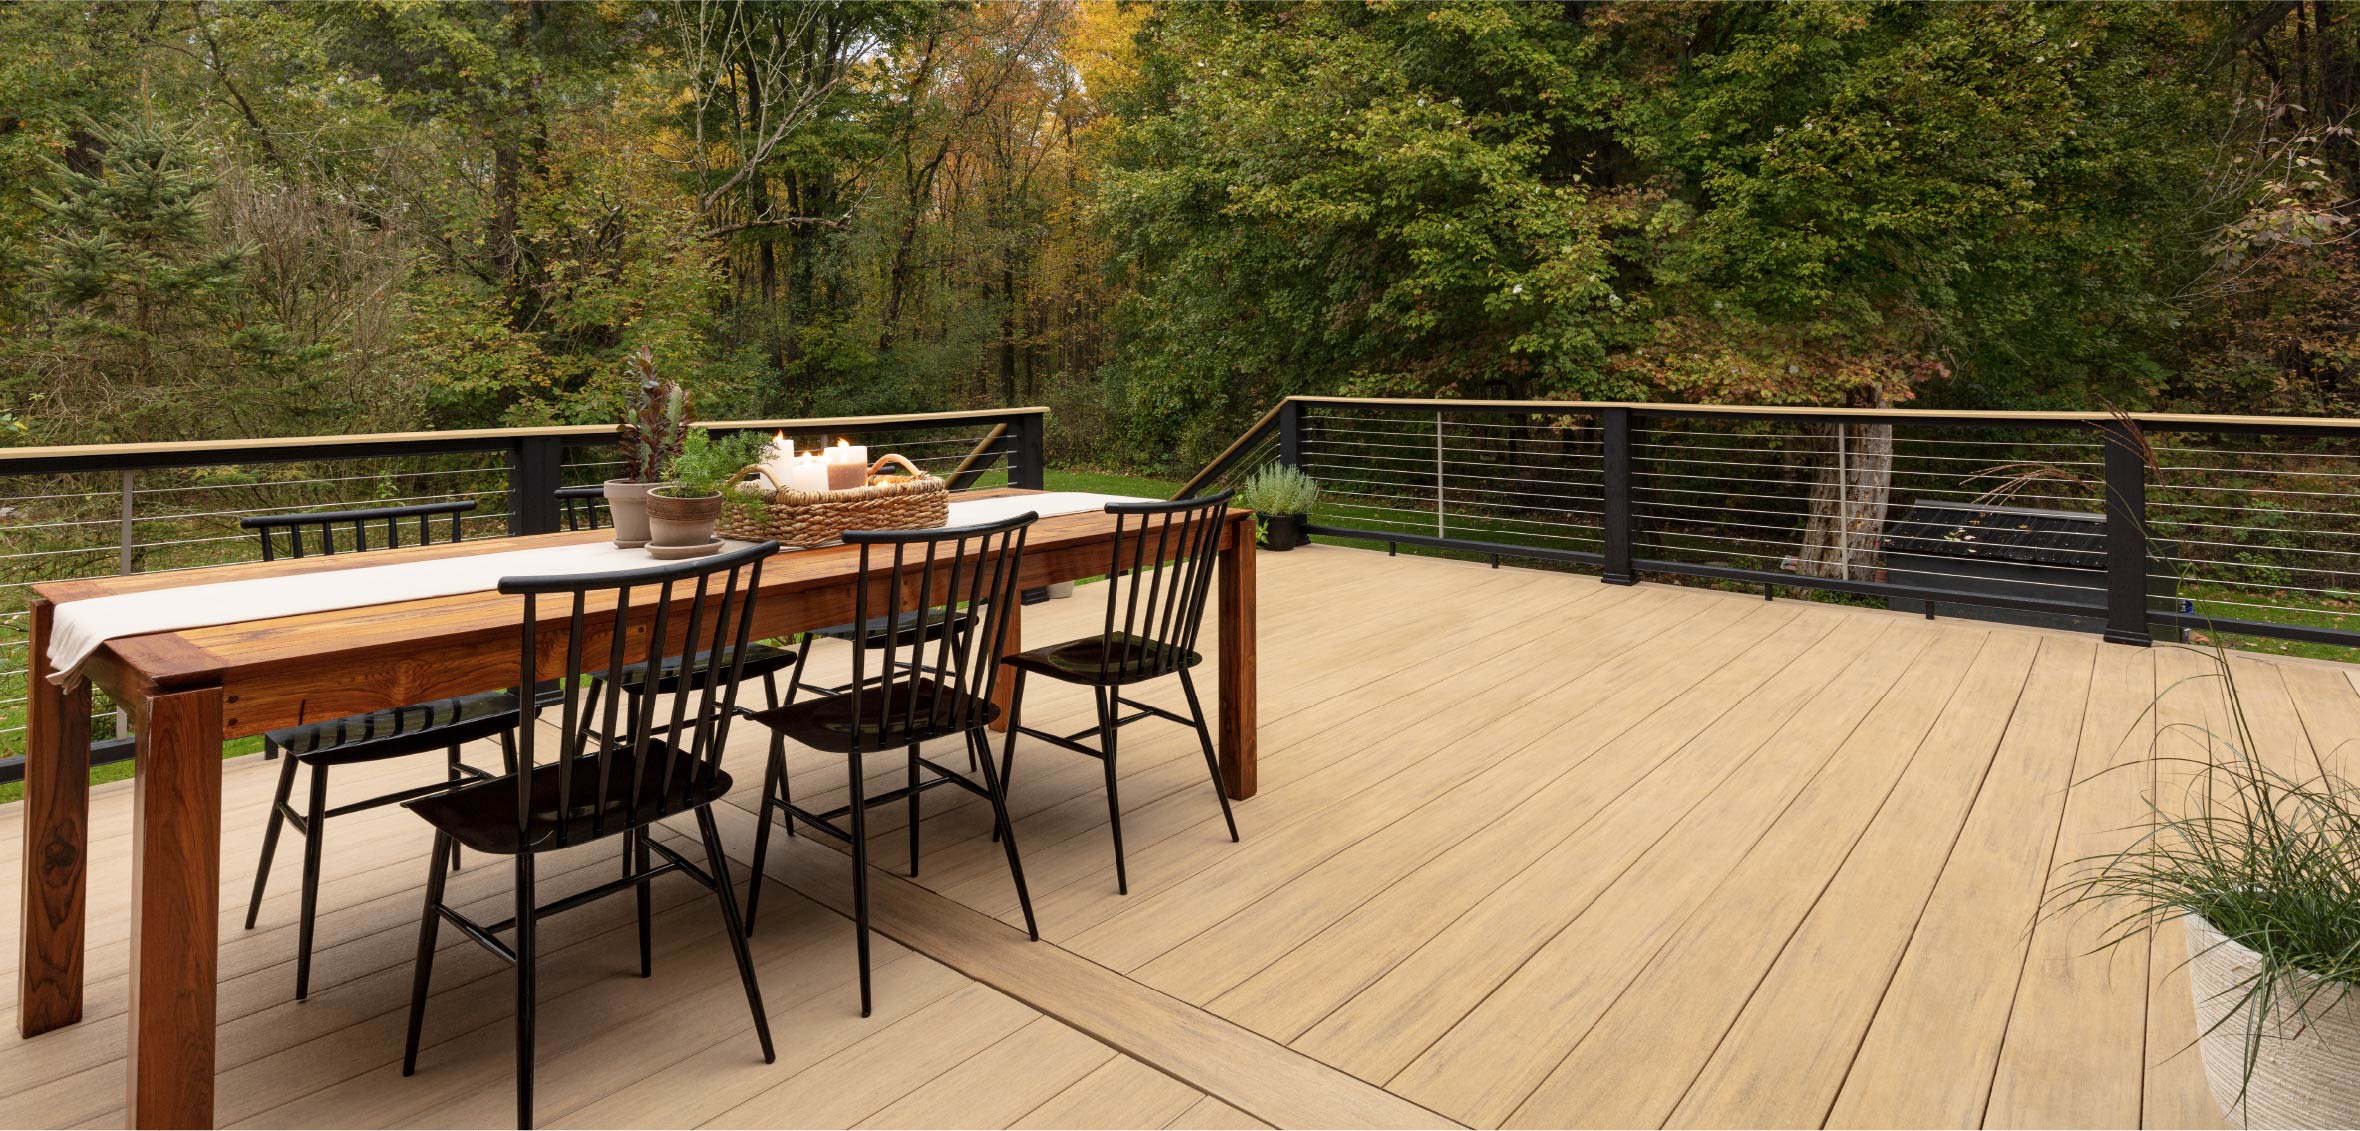 A long dining table with six chairs is set on a light wood deck with black cable railing along the perimeter.